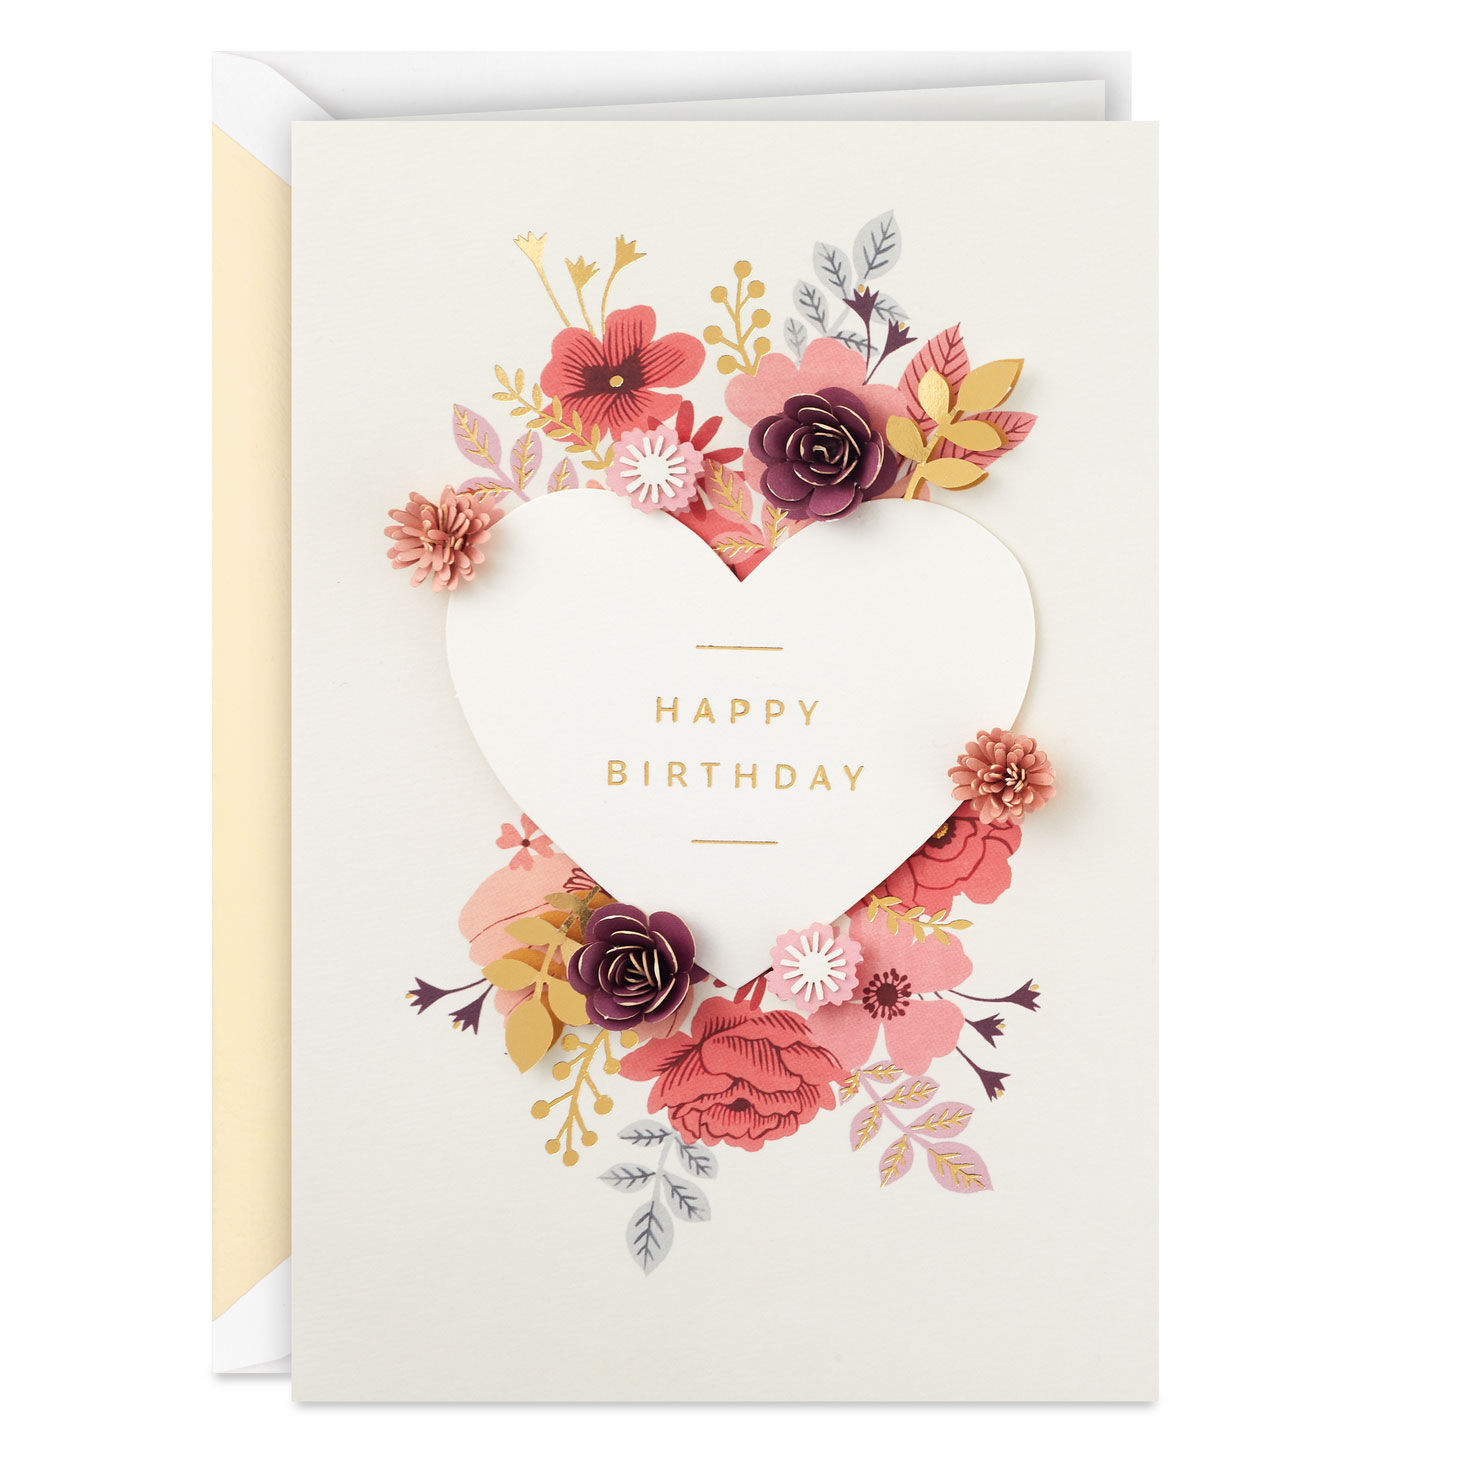 My Favorite Person Hearts and Flowers Birthday Card for only USD 8.59 | Hallmark